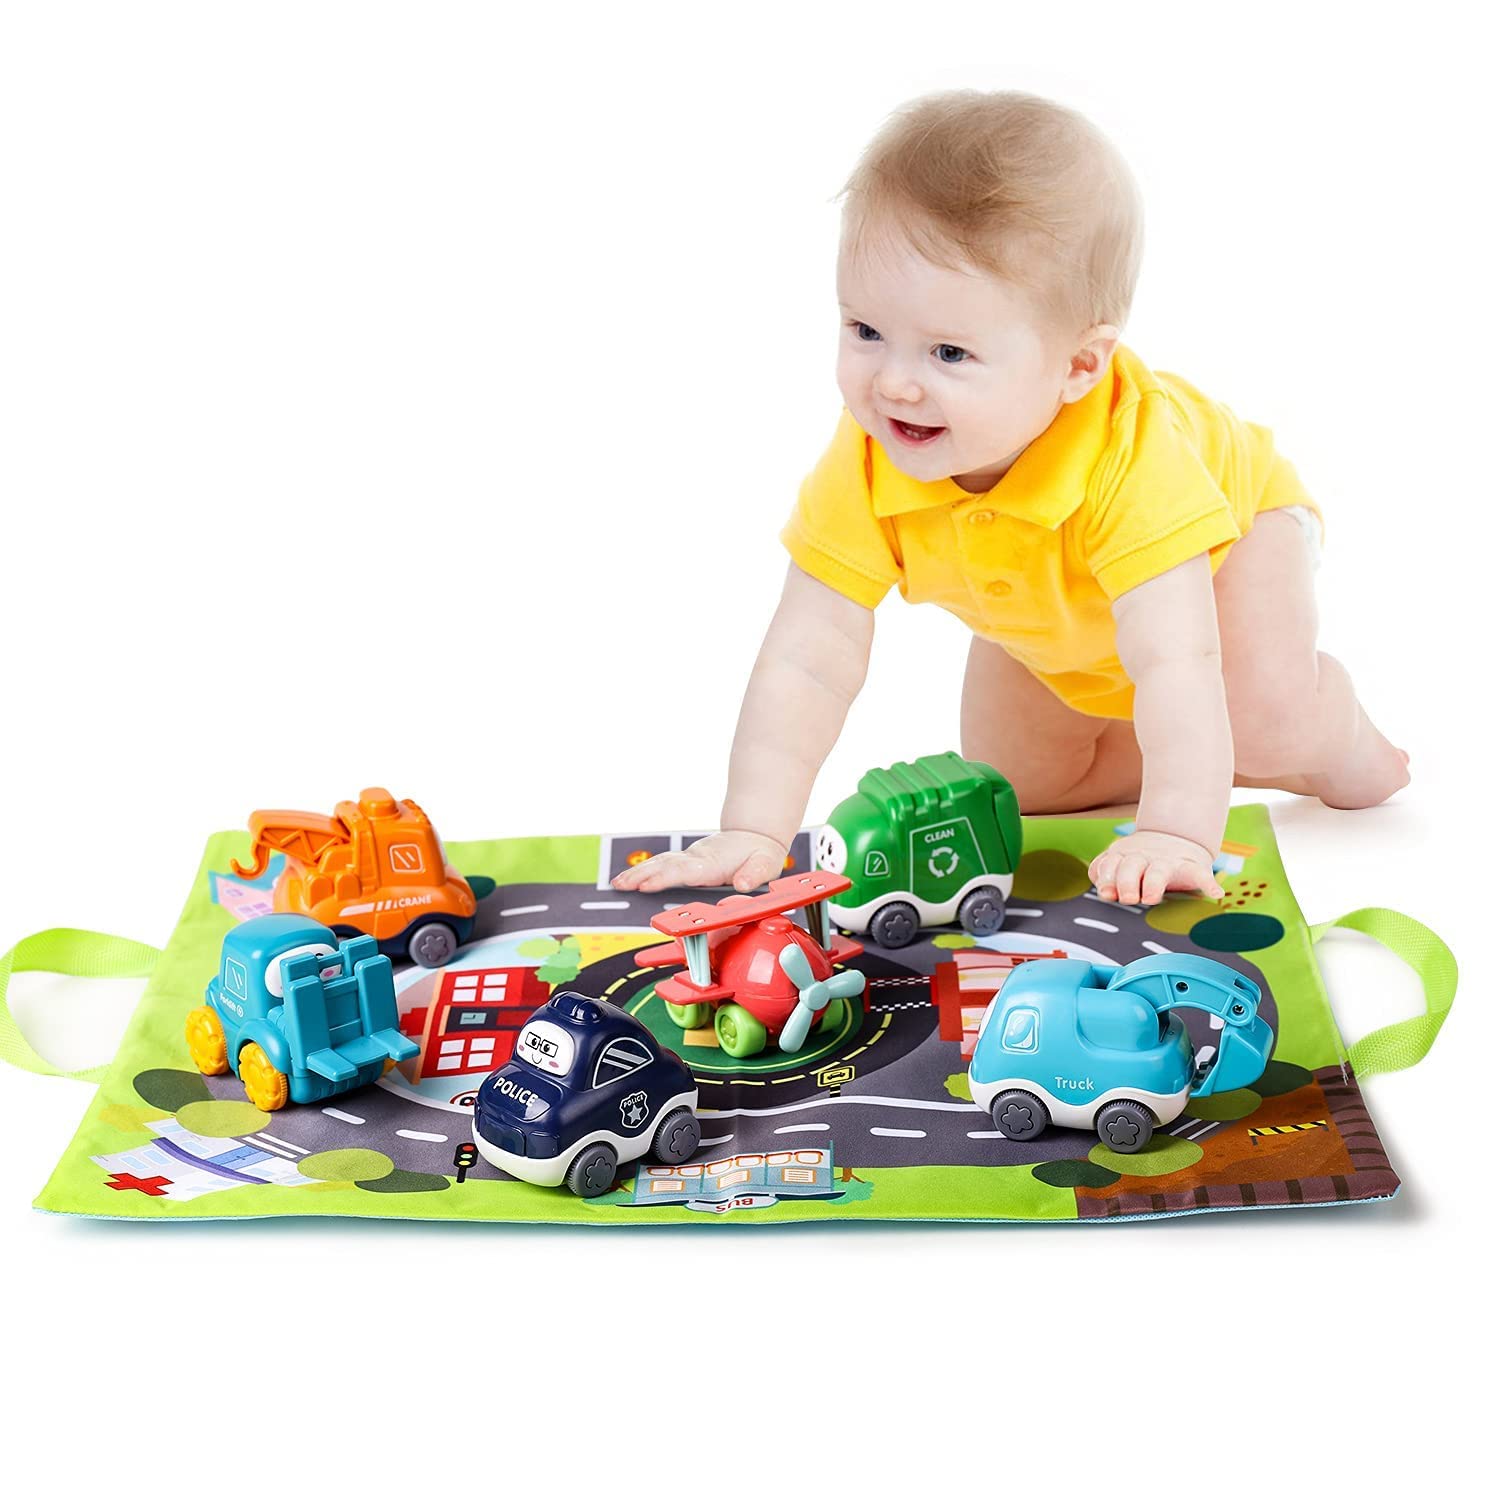 ALASOU 2021 Edition Baby Truck car Toy Sets and playmat/Storage Bag for Toddler | Baby Toys 12 - 18 Months | Toys for 1 2 3 Year Old boy| Birthday Gifts for Infant Toddlers(6 Sets)